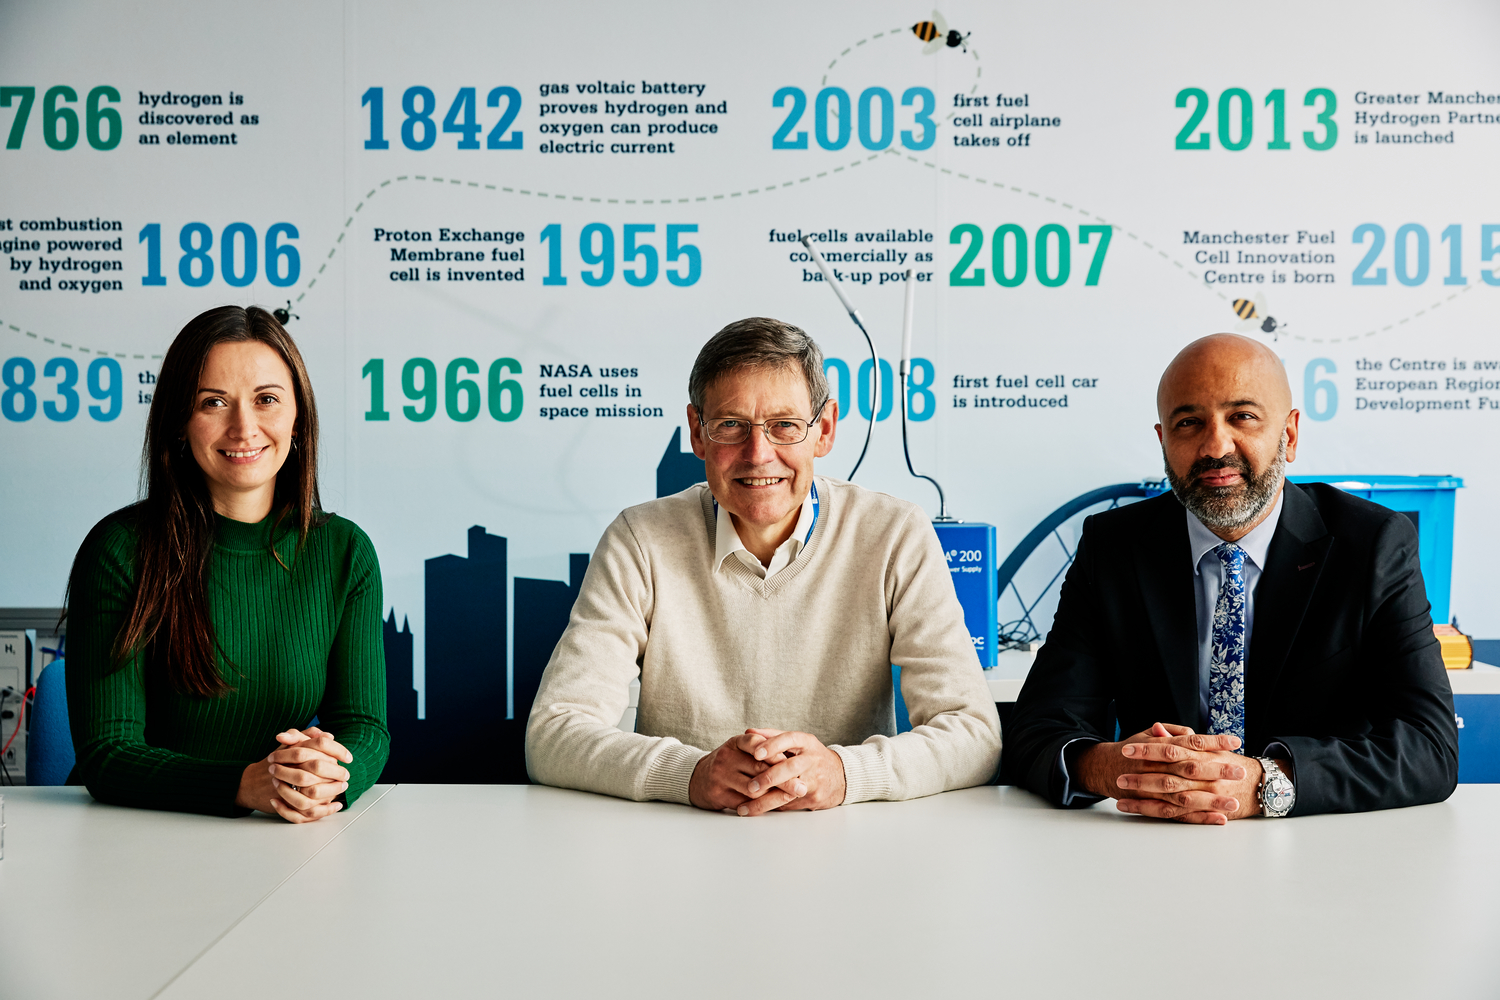 Manchester Fuel Cell Innovation Centre's Dr Justyna Kulczyk-Malecka, post-doctoral research associate; Dr Ian Madley, reader, and director Amer Gaffar